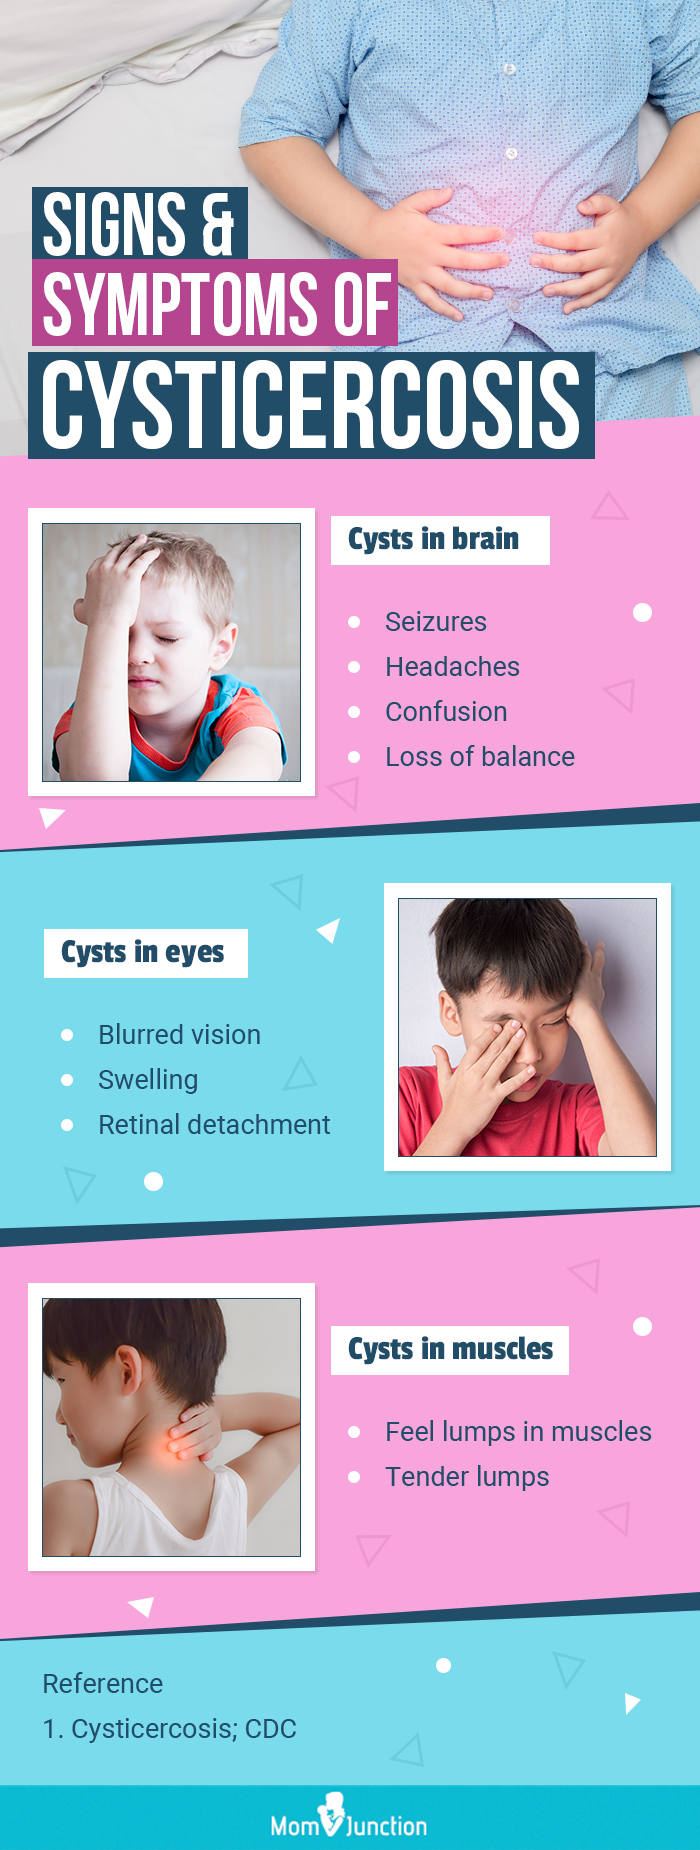 signs and symptoms of cysticercosis (infographic)